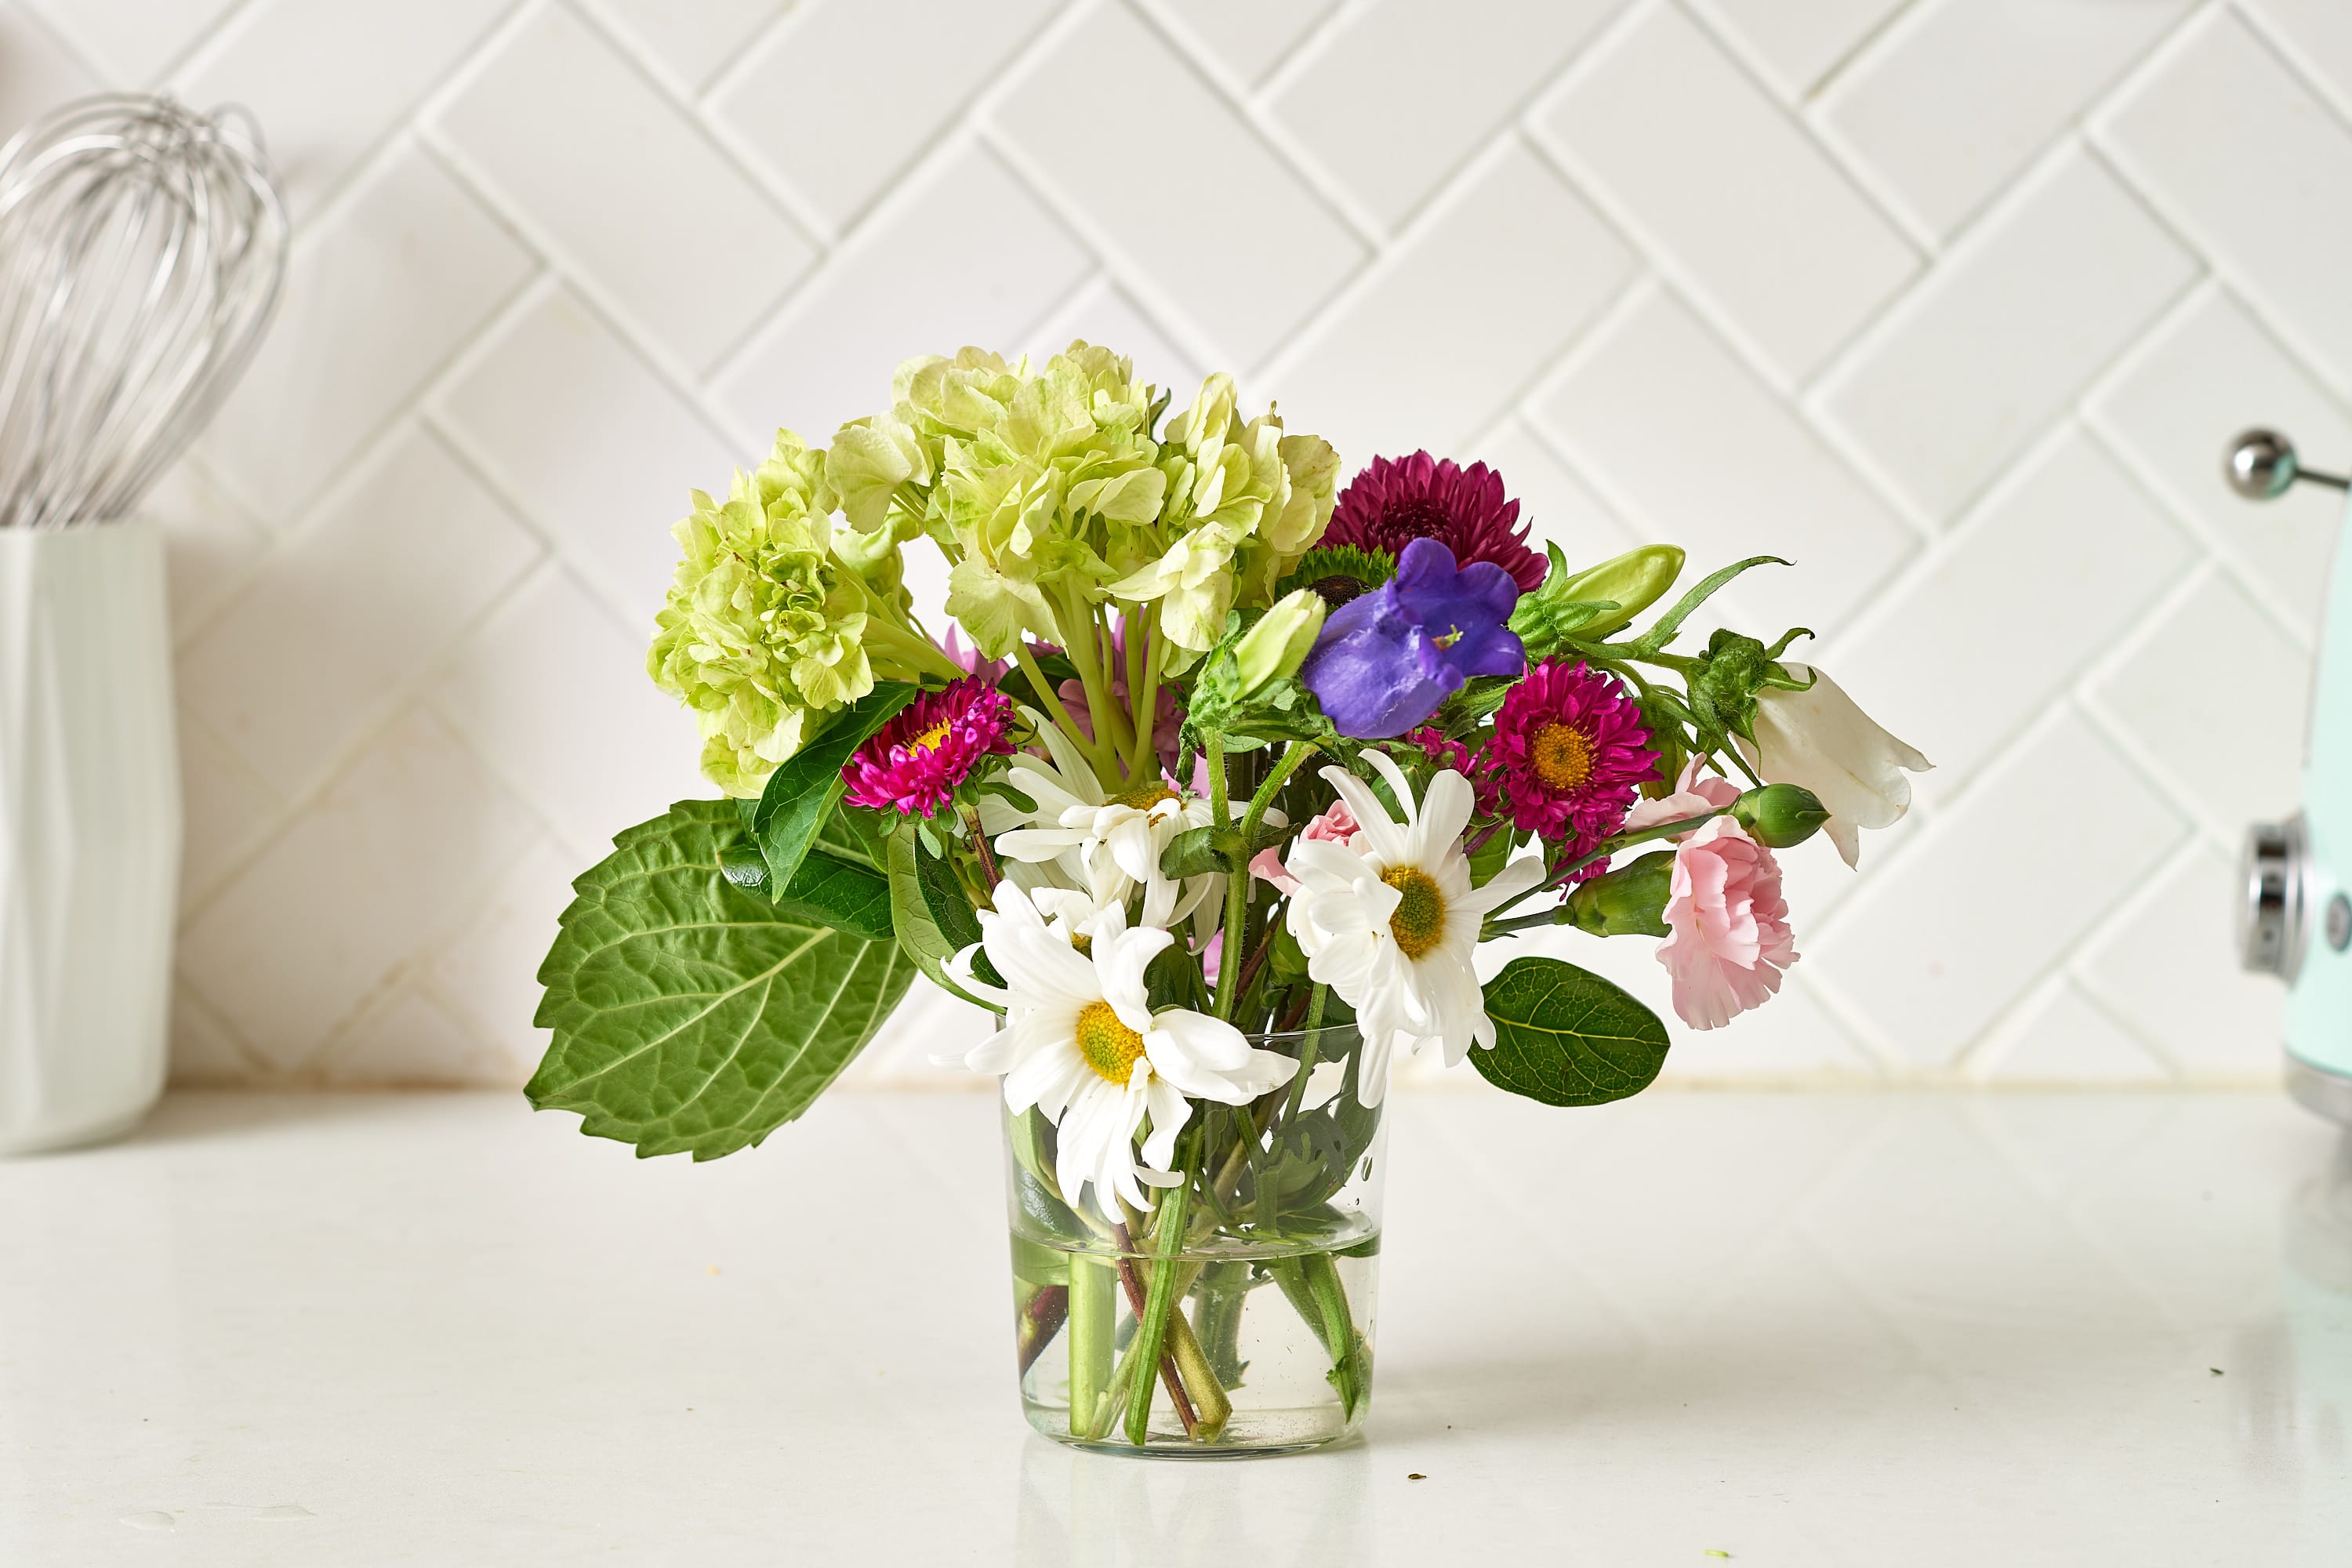 how to take care of cut flowers in a vase